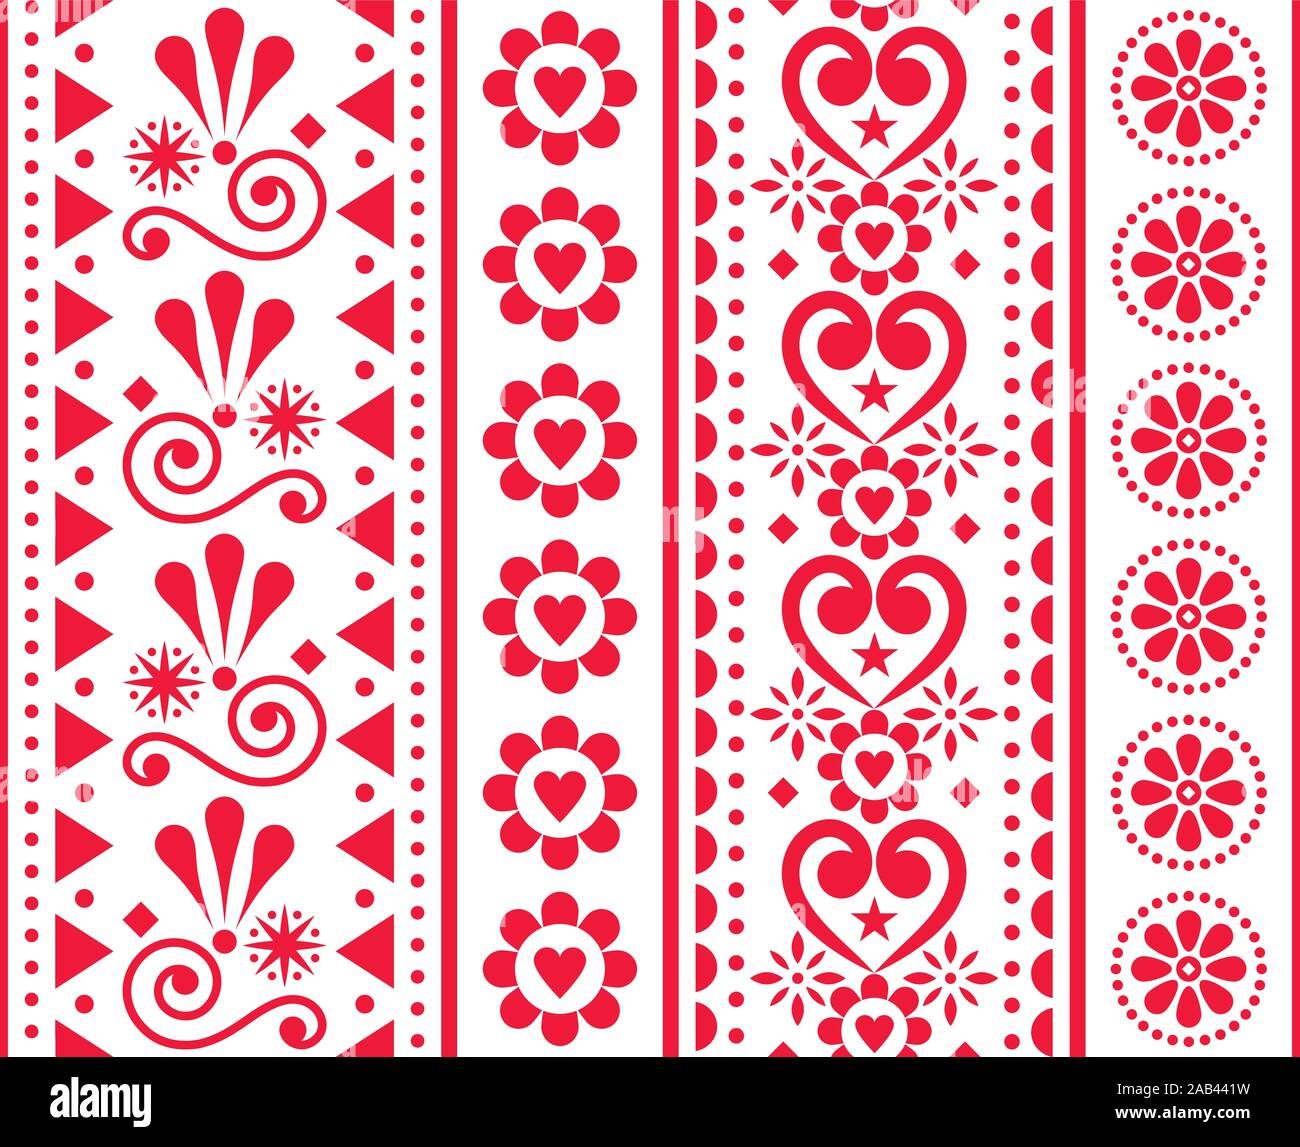 Valentine's Day vector seamless vertical pattern - Scandinavian traditional embroidery folk art style with flowers and hearts Stock Vector